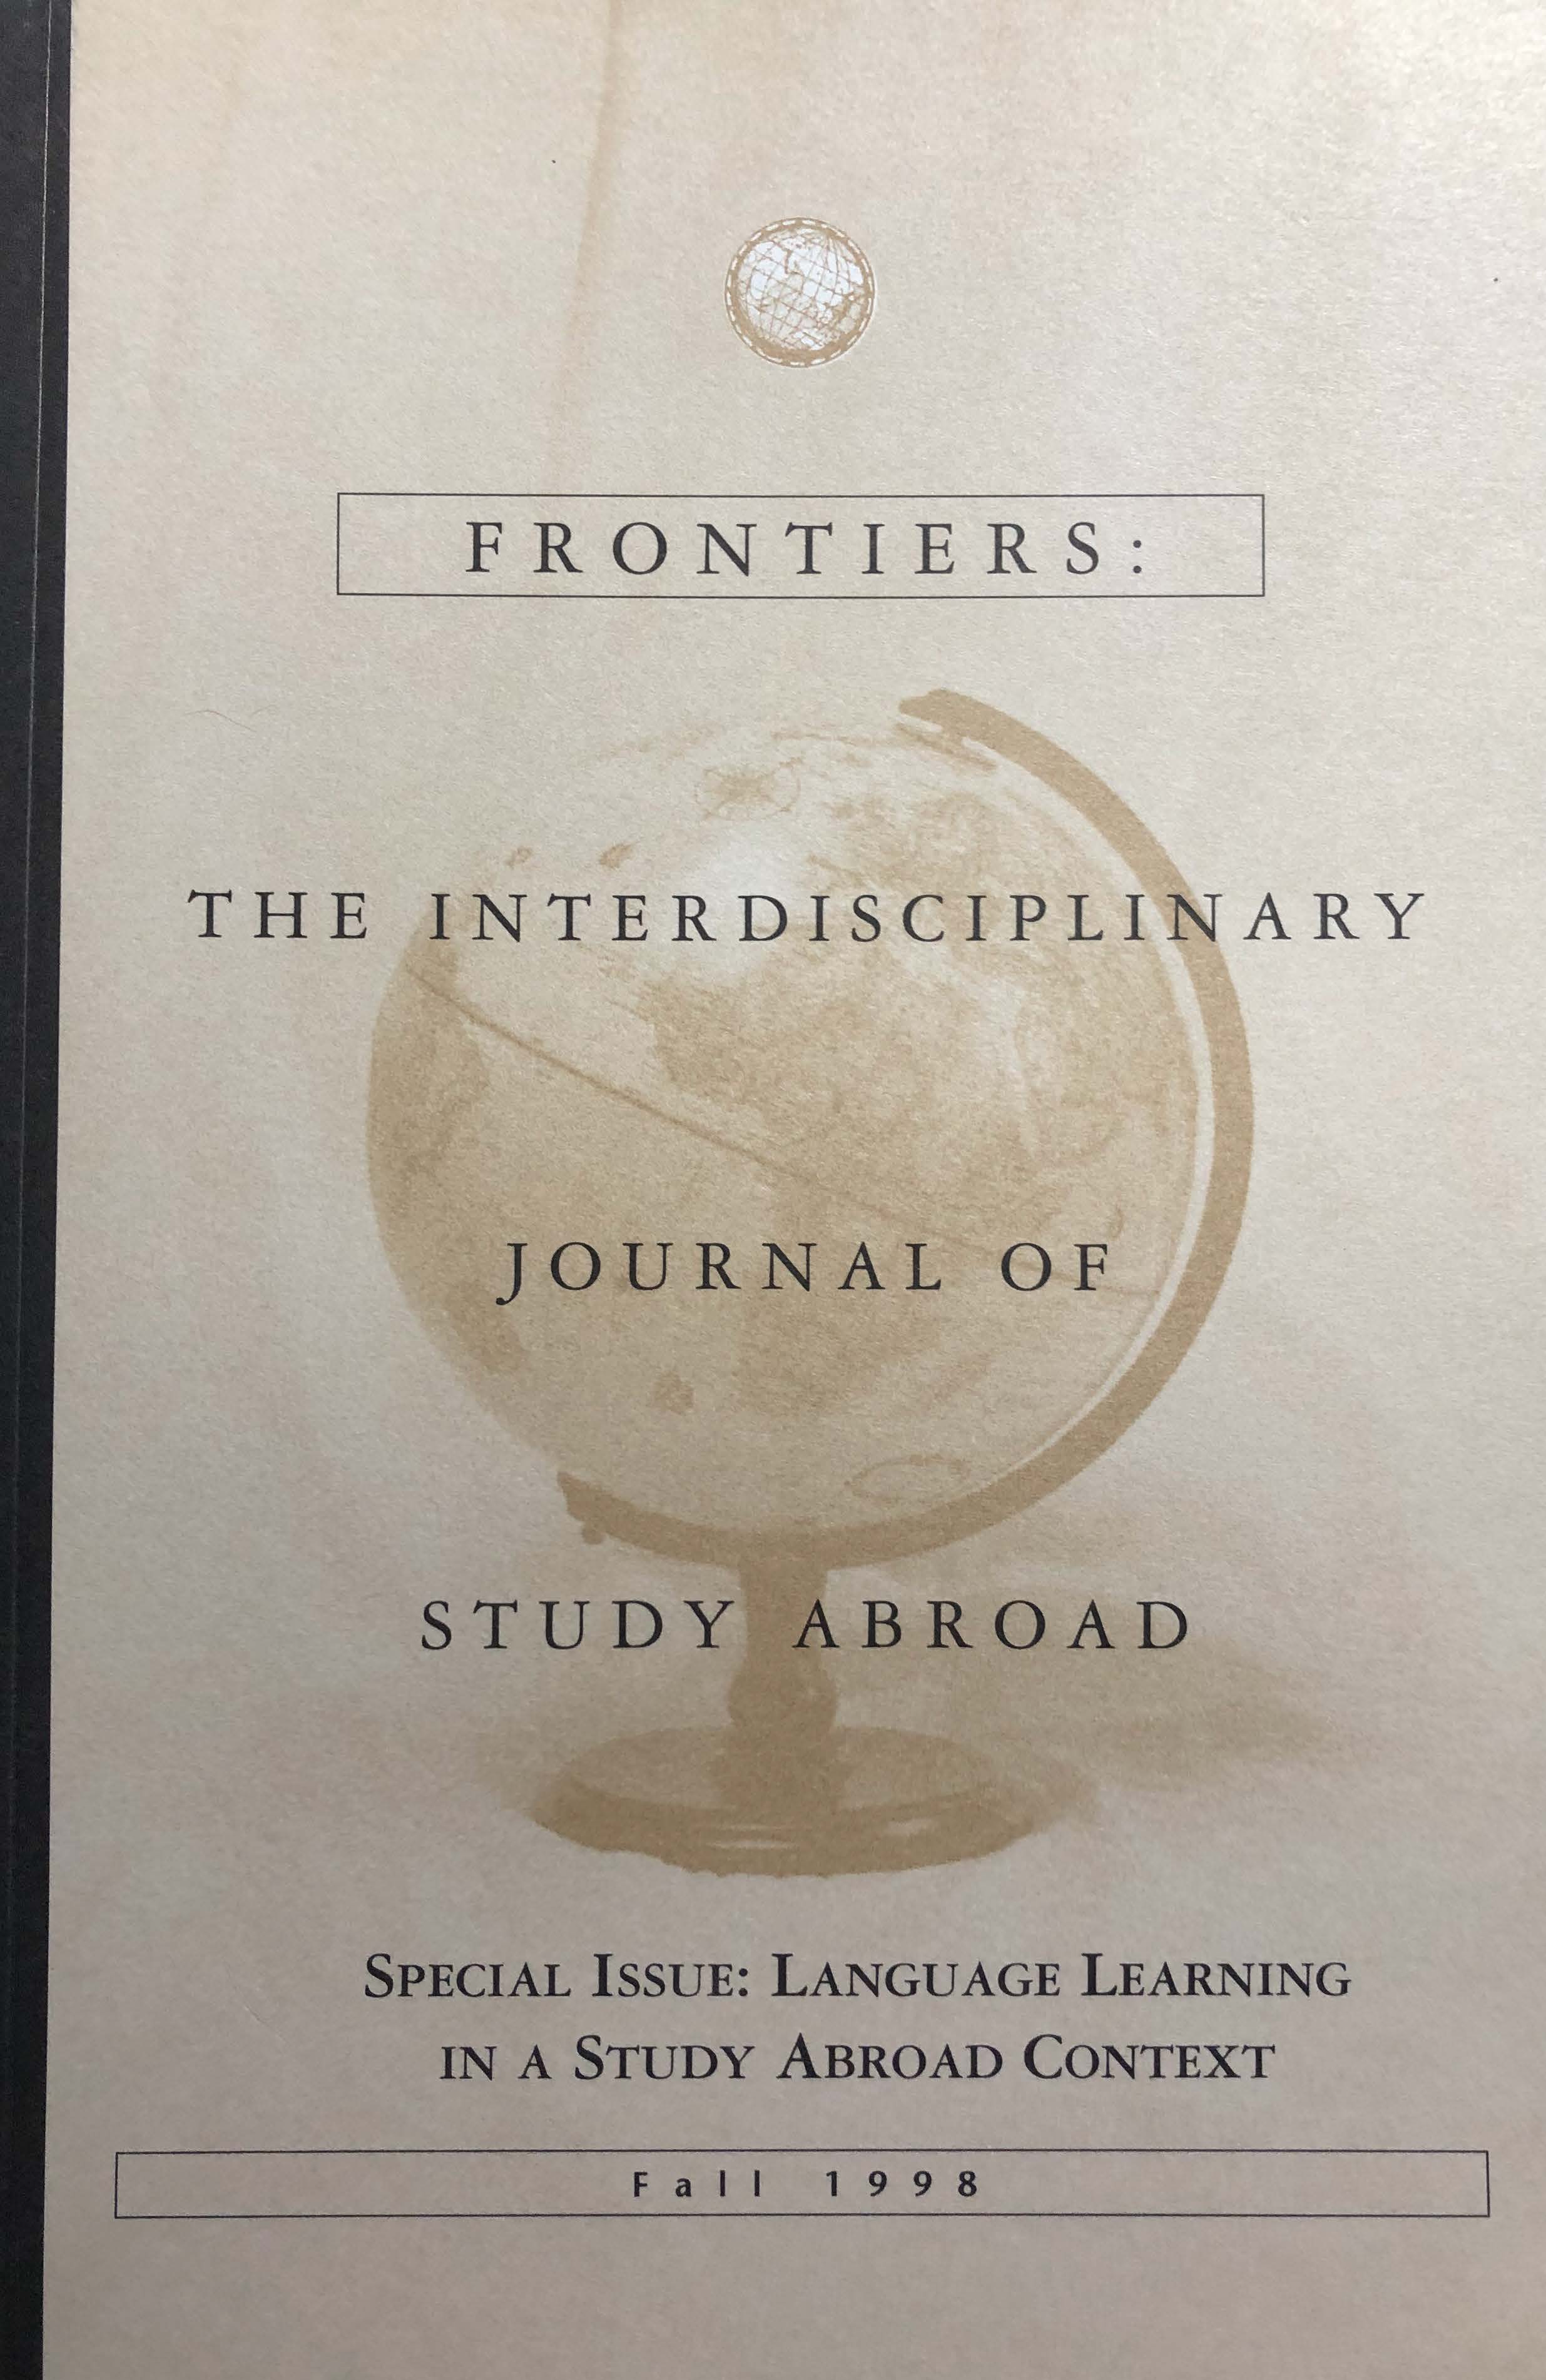 Cover of Frontiers: The Interdisciplinary Journal of Study Abroad, Special Issue: Language Learning in a Study Abroad Contect, Fall 1998